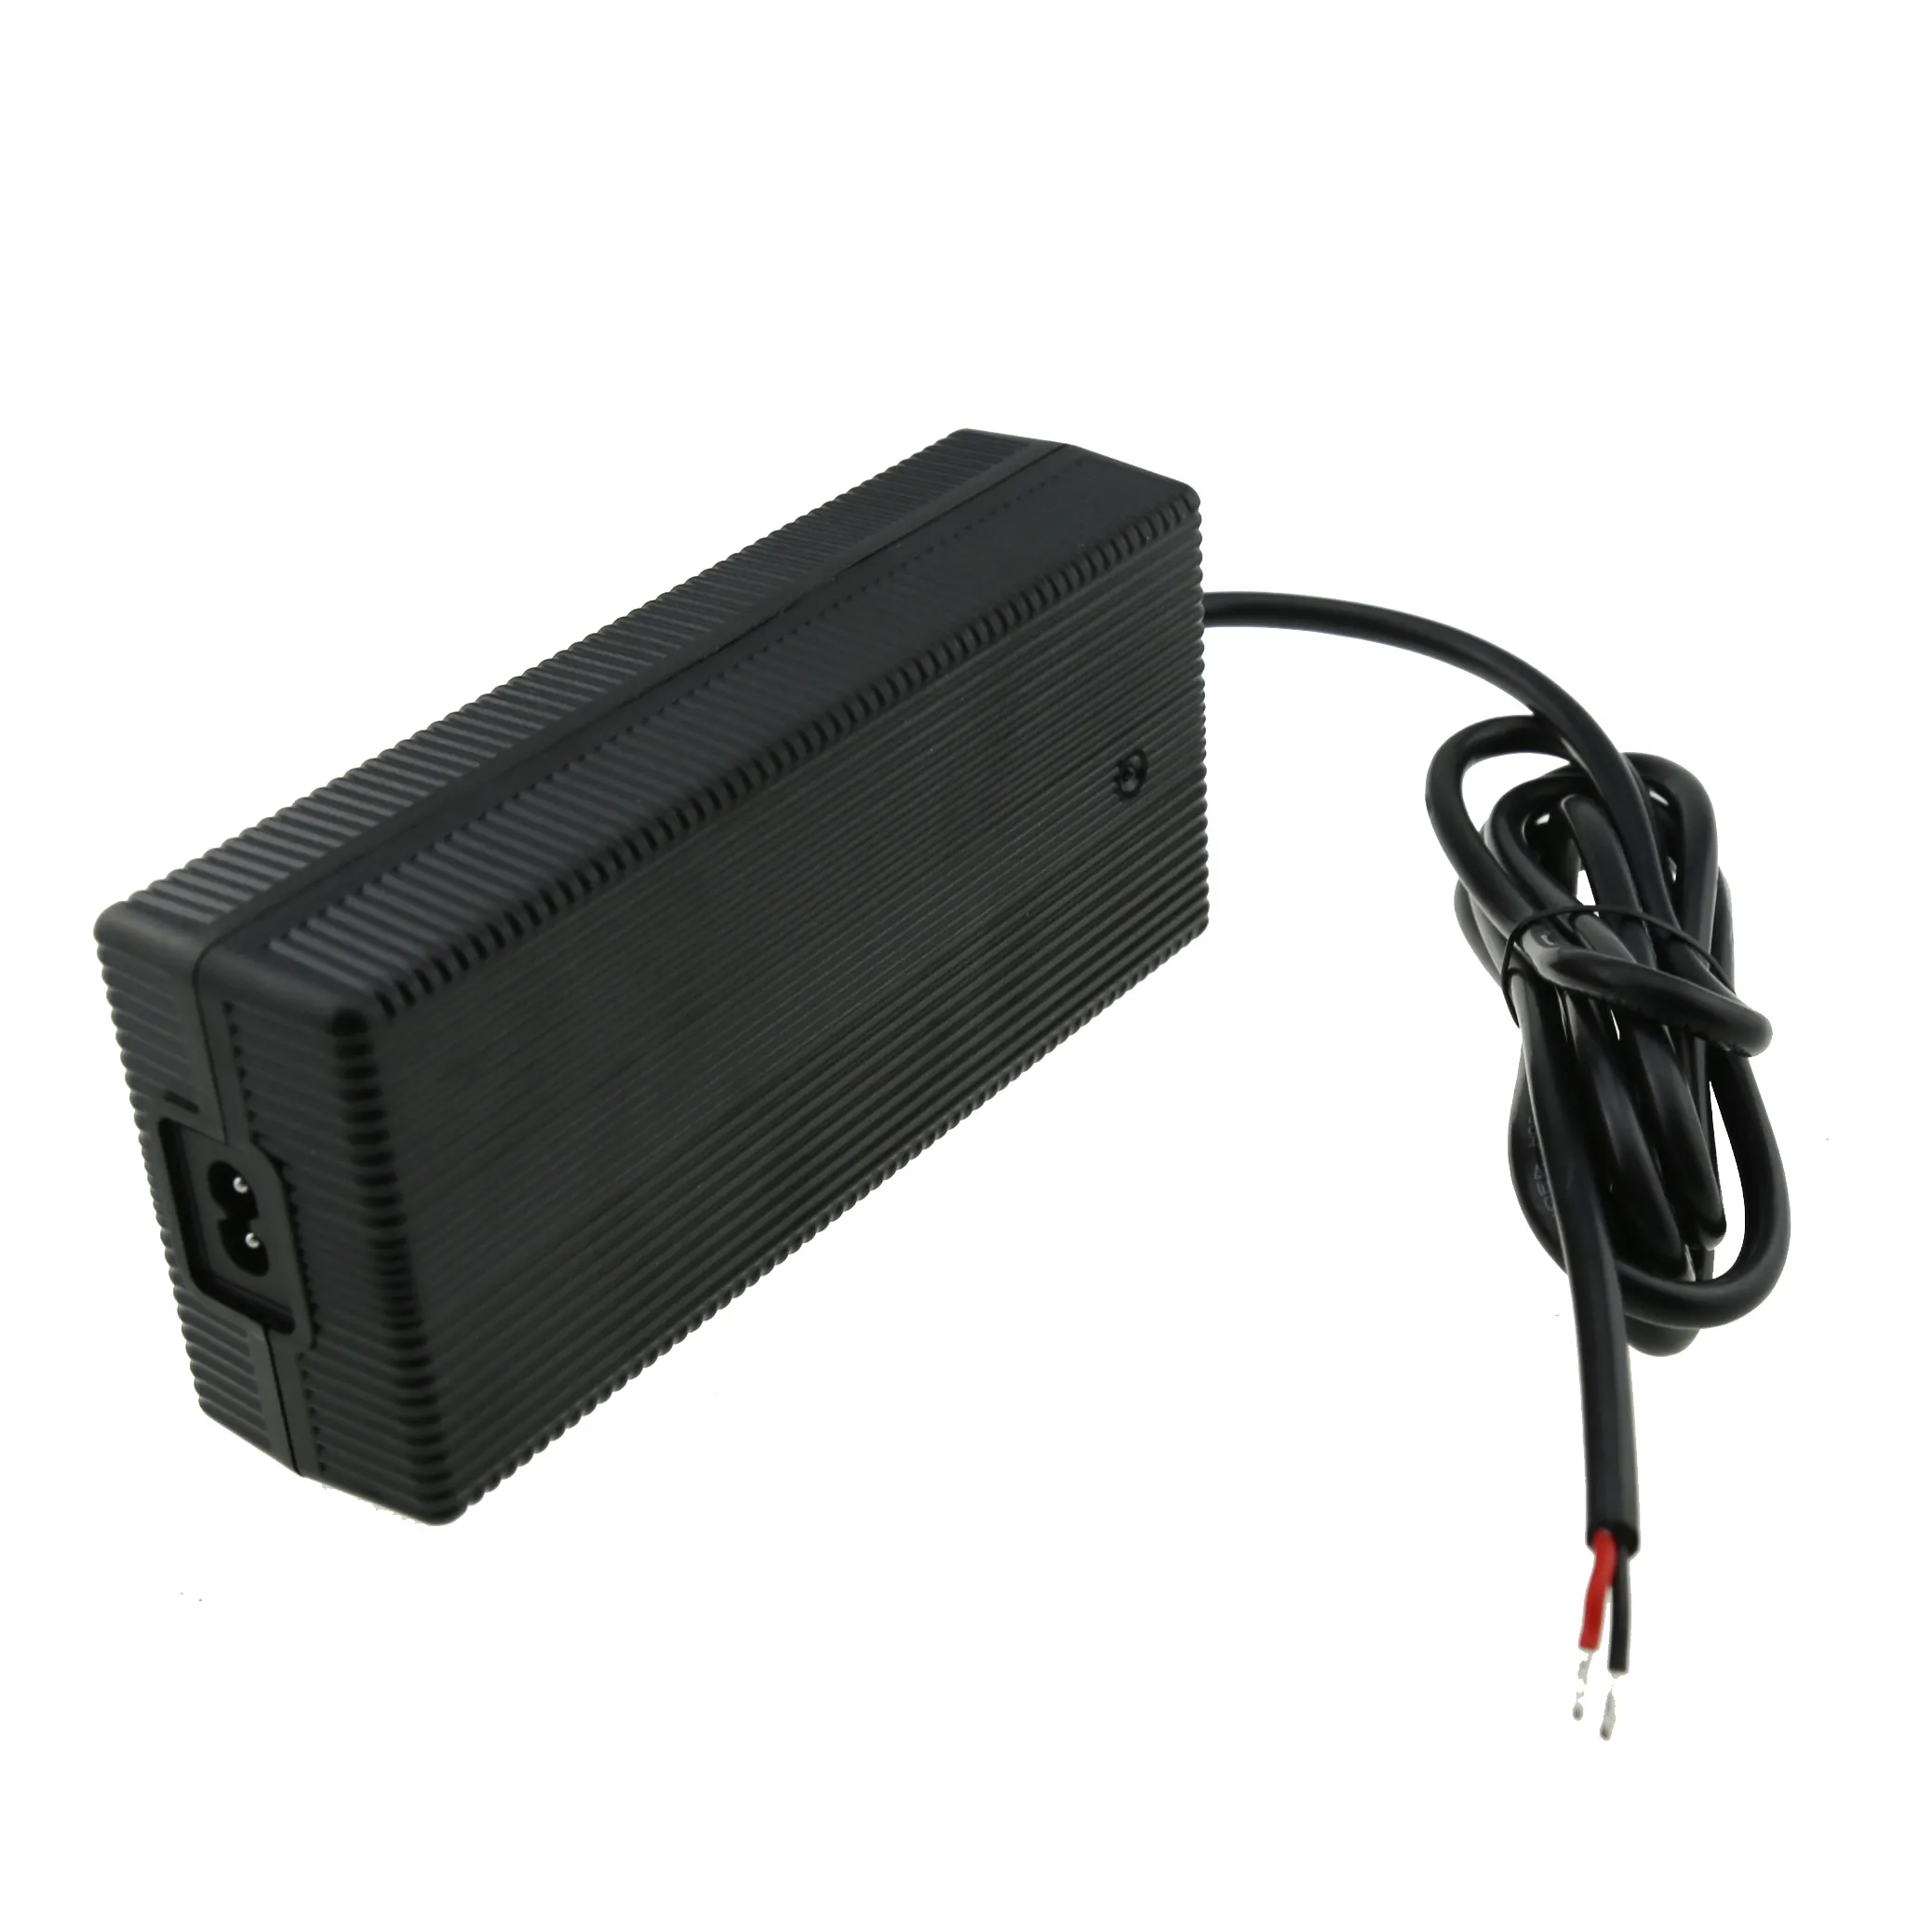 Fuyuang 200 Watt 8S 25.6V High Efficiency Low Energy Consumption 29.2V 7A LifePo4 Battery Charger